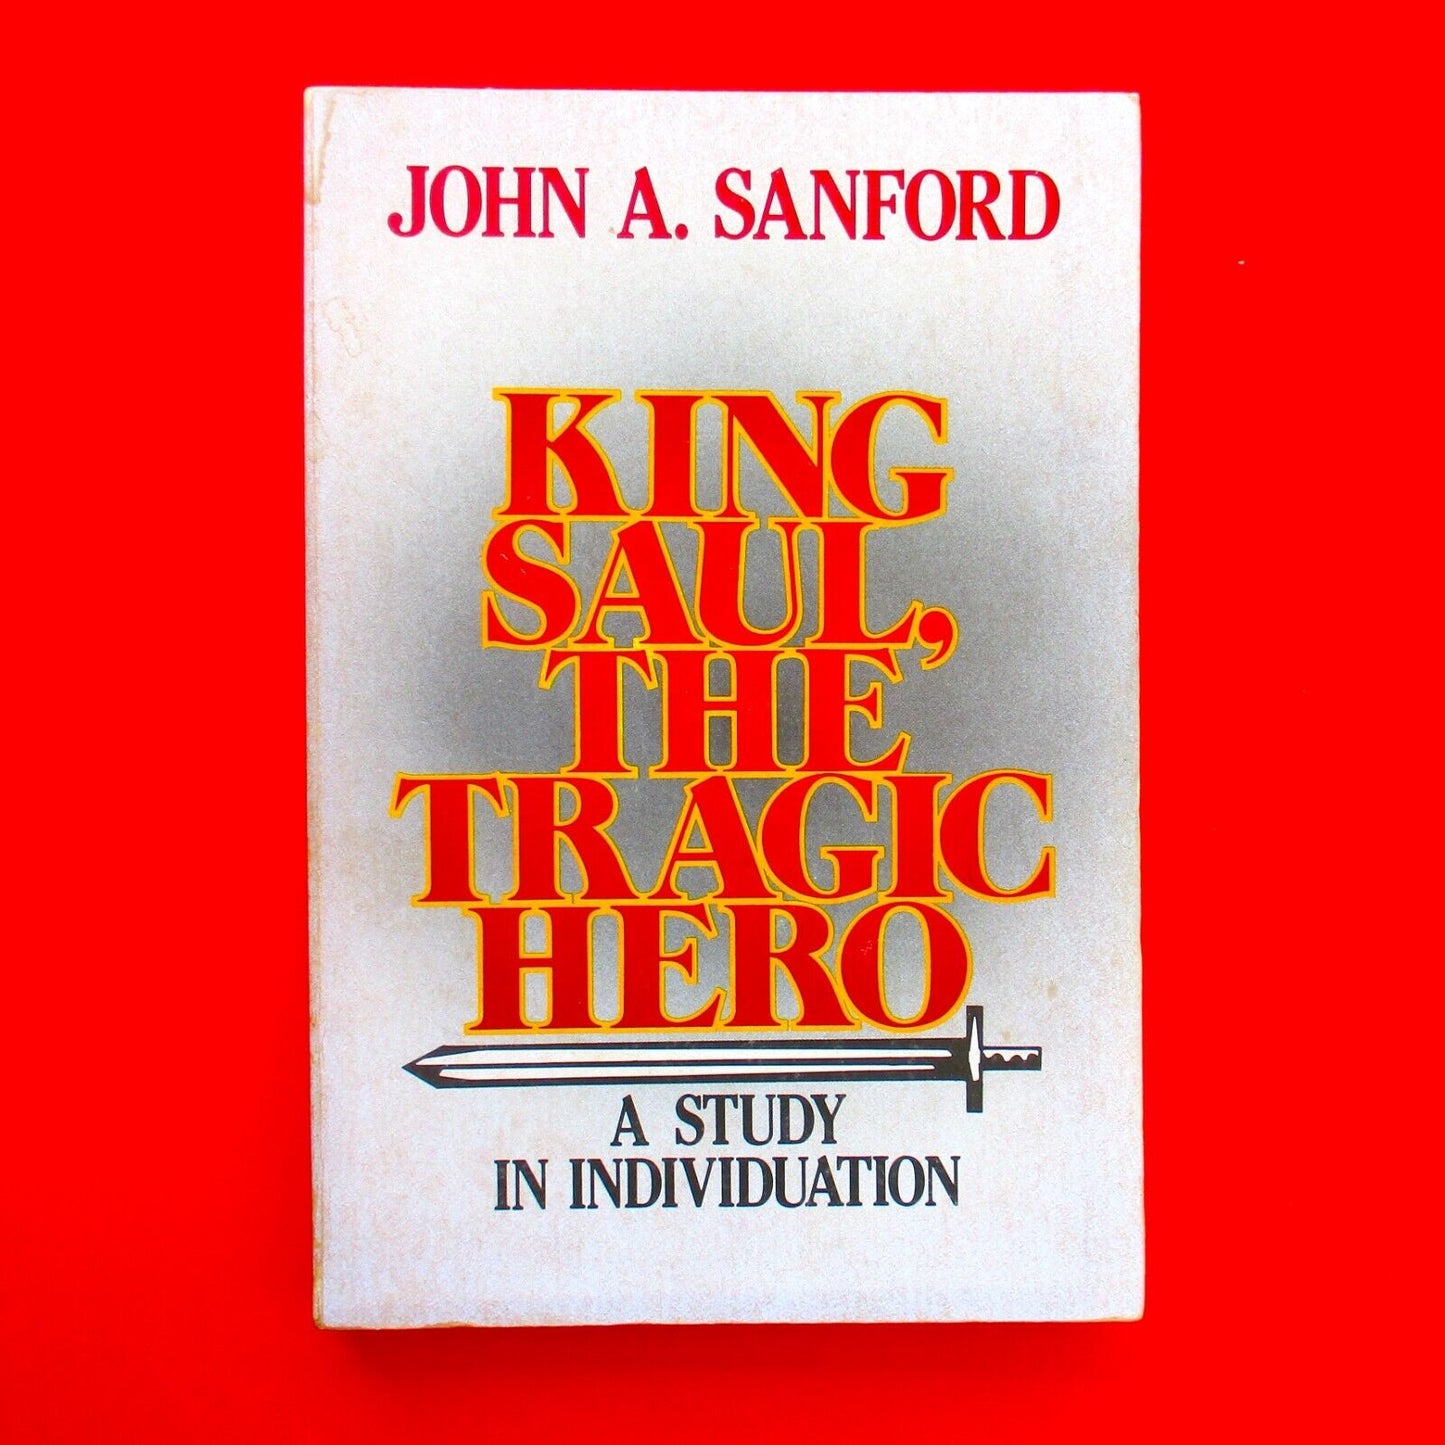 King Saul The Tragic Hero A Study in Individuation by John Standford 1985